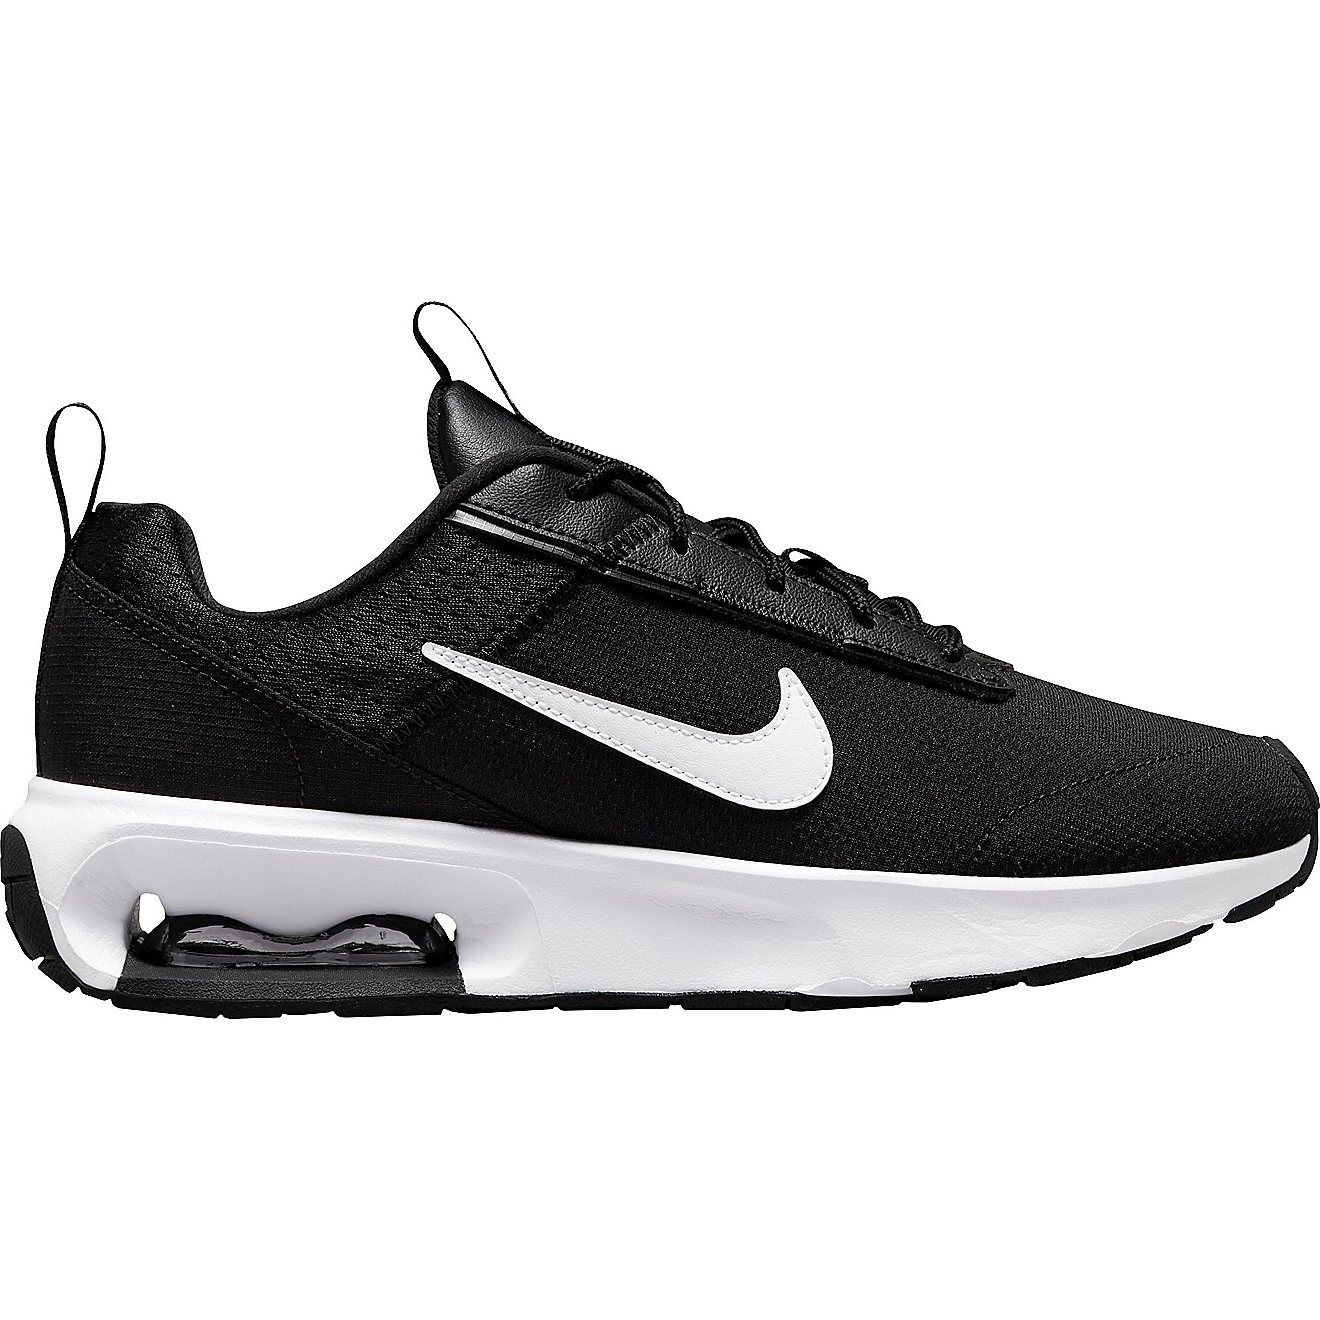 Nike Women's Air Max Intrlk Lite Shoes | Free Shipping at Academy | Academy Sports + Outdoors